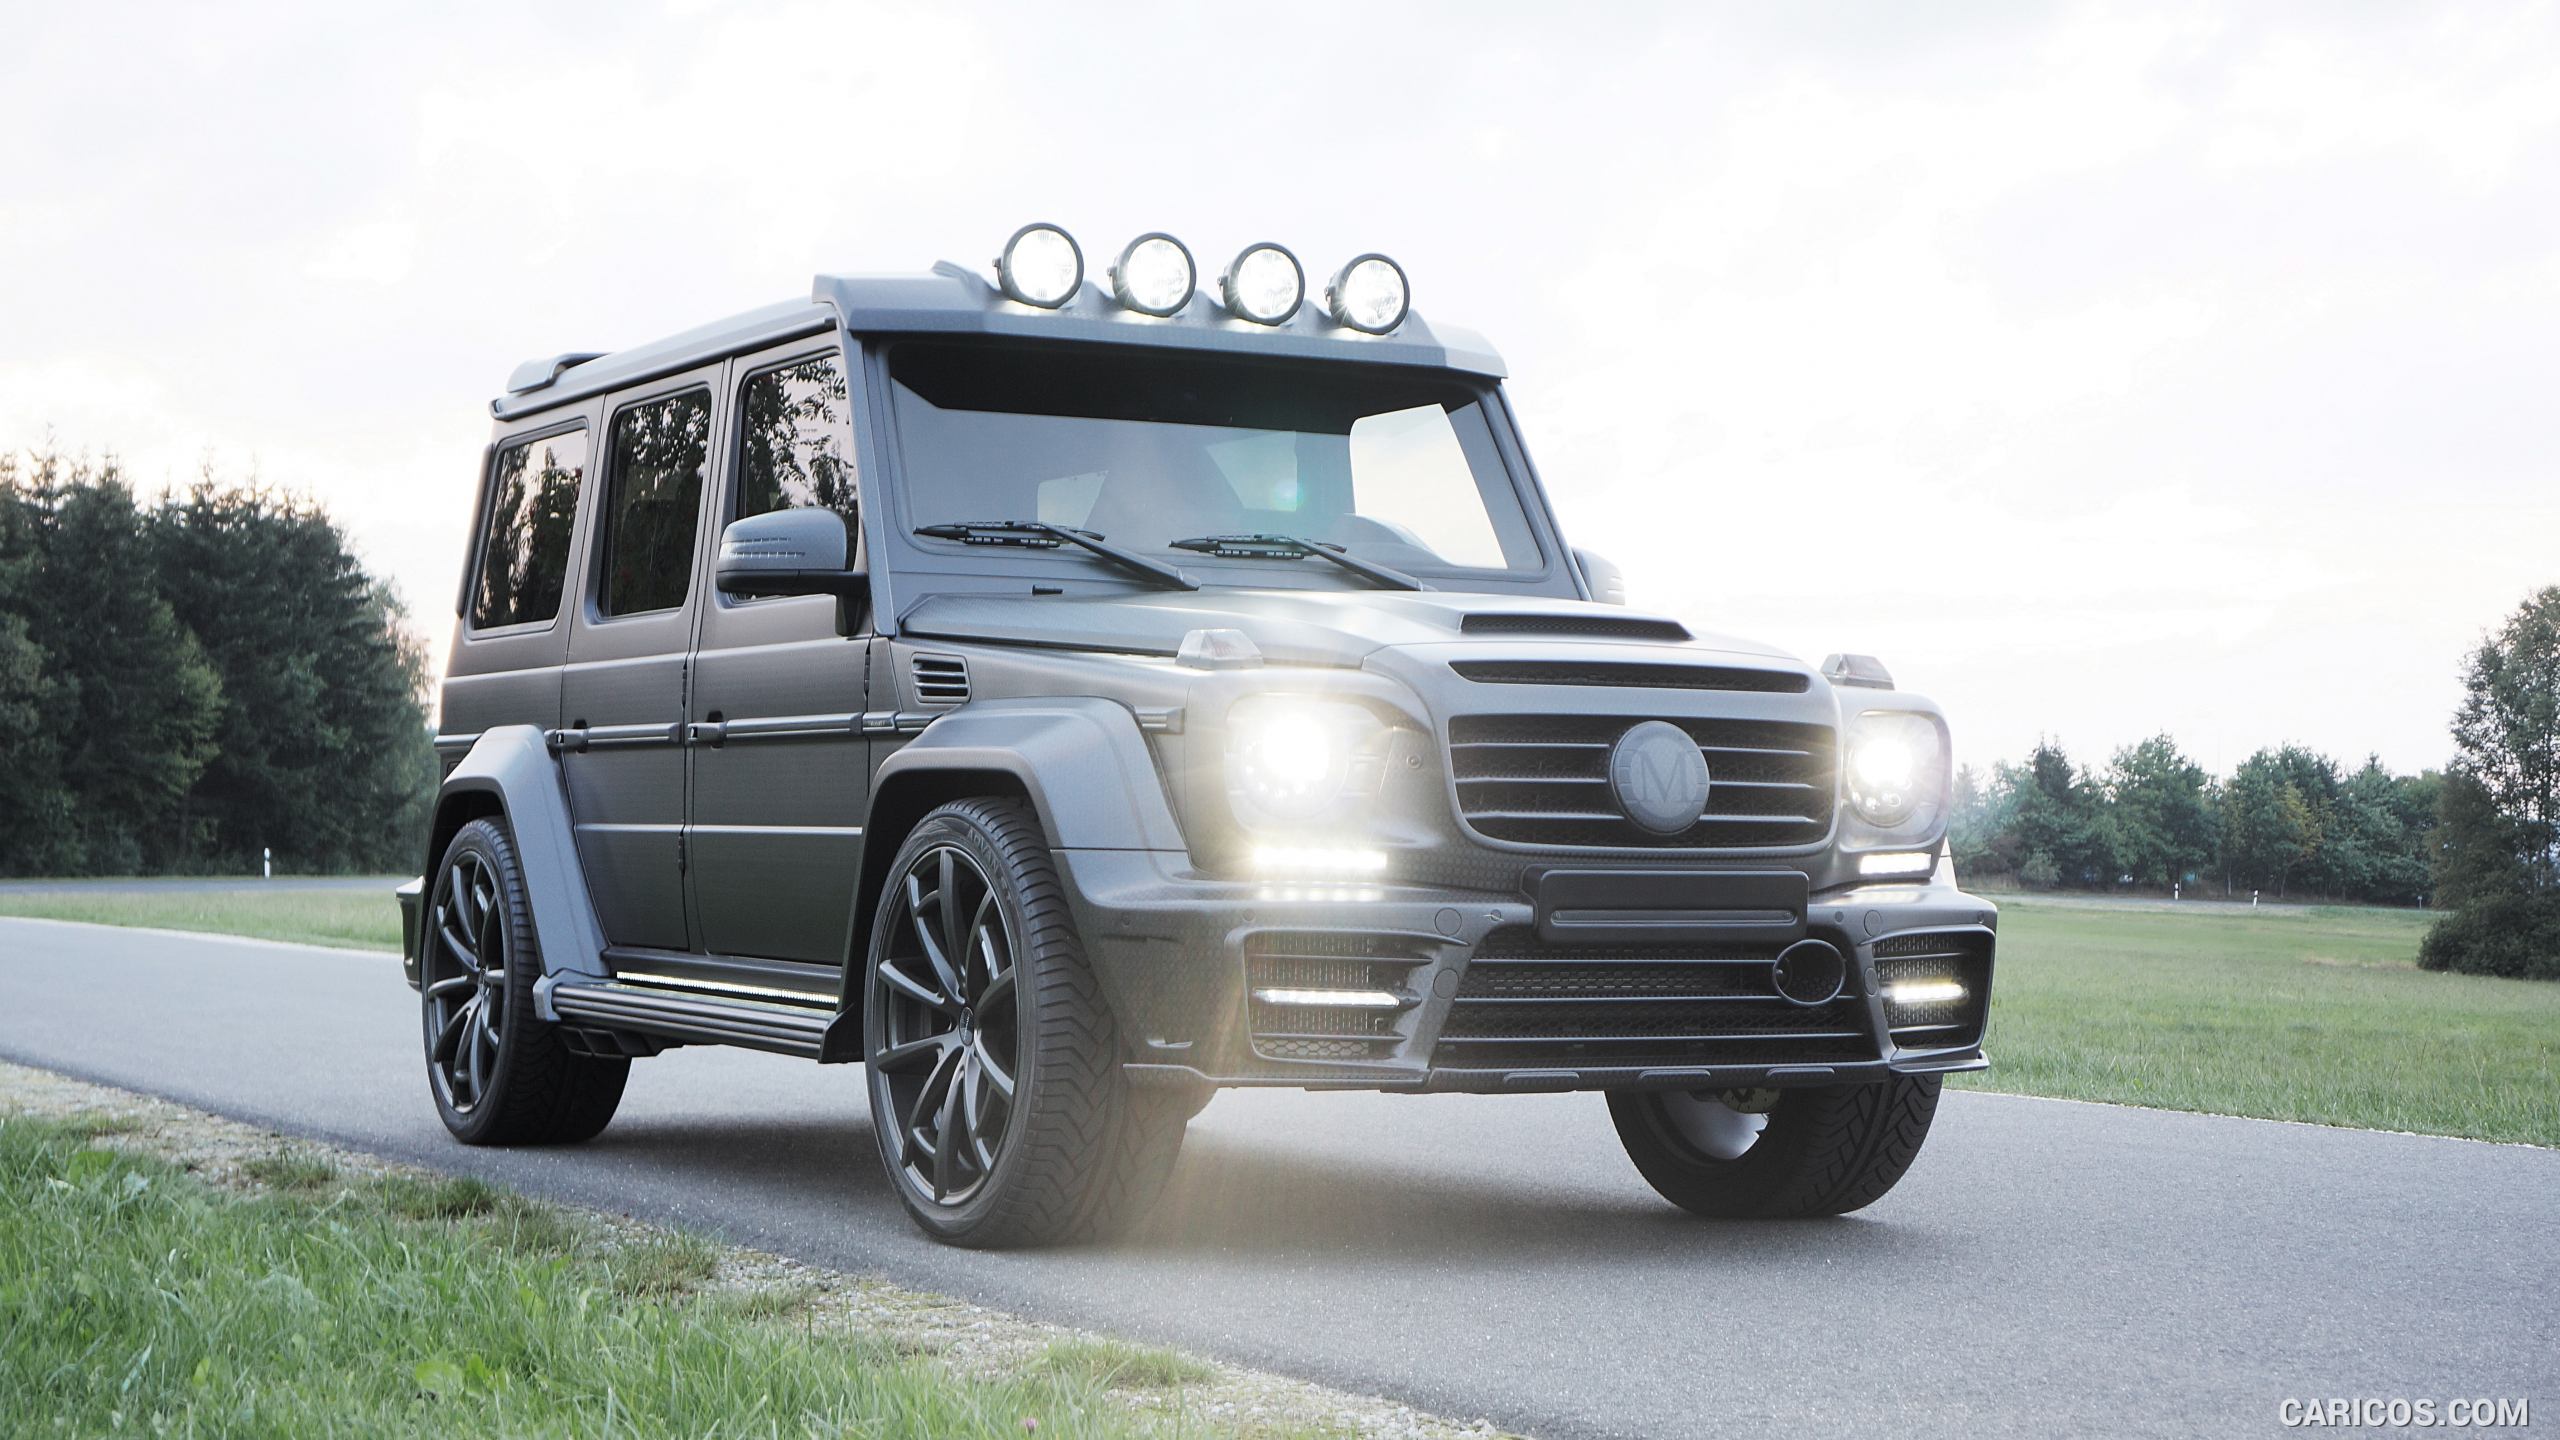 2016 MANSORY GRONOS Black Edition based on Mercedes G63 AMG - Front, #1 of 16